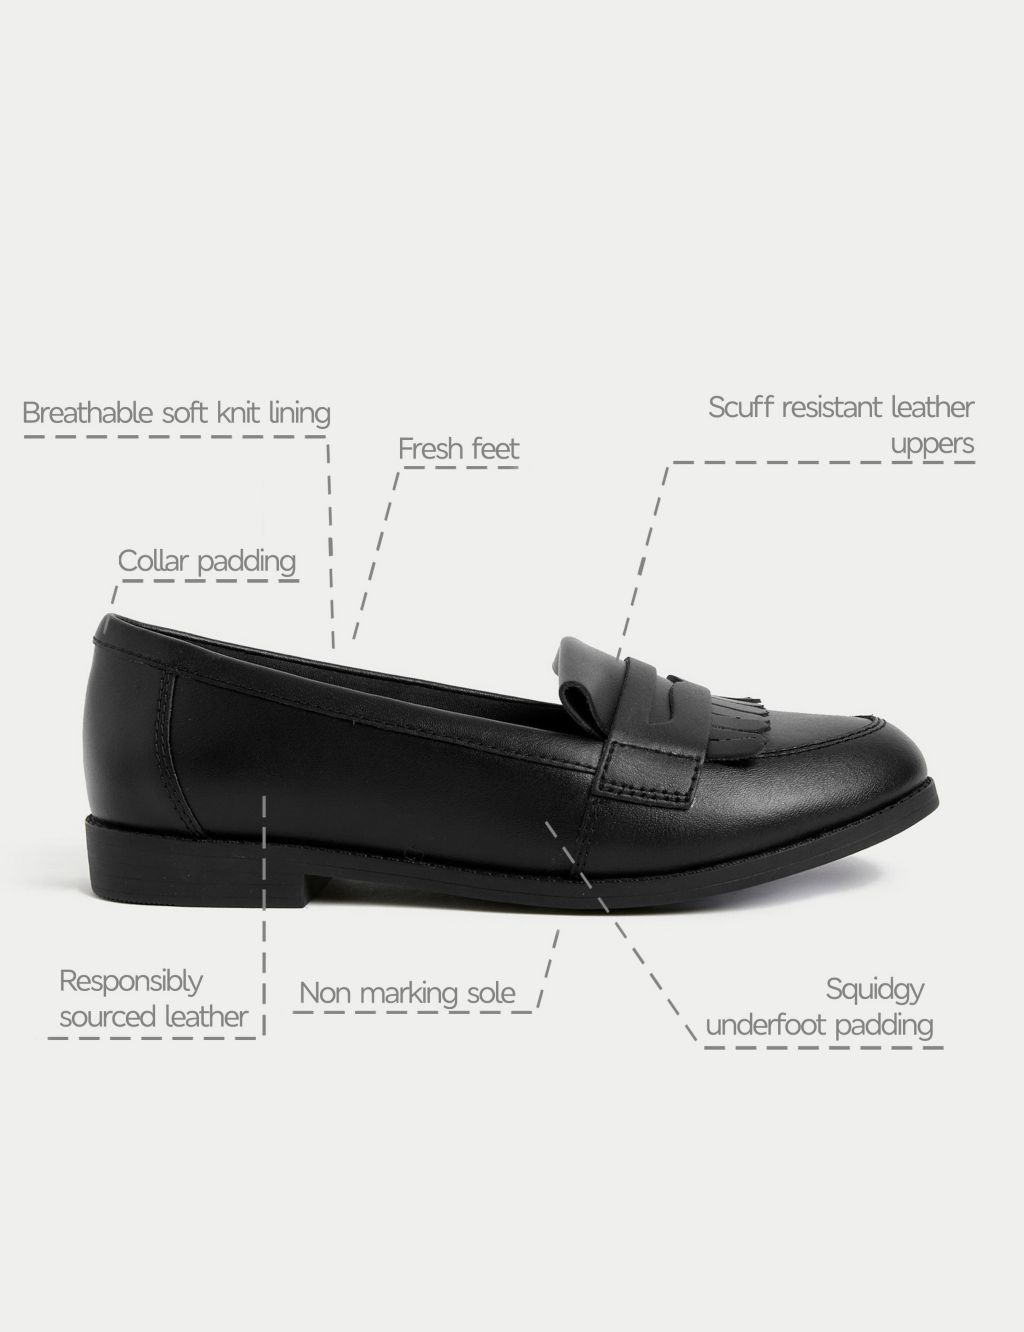 Kids' Leather Freshfeet™ School Loafers (13 Small - 7 Large) image 5